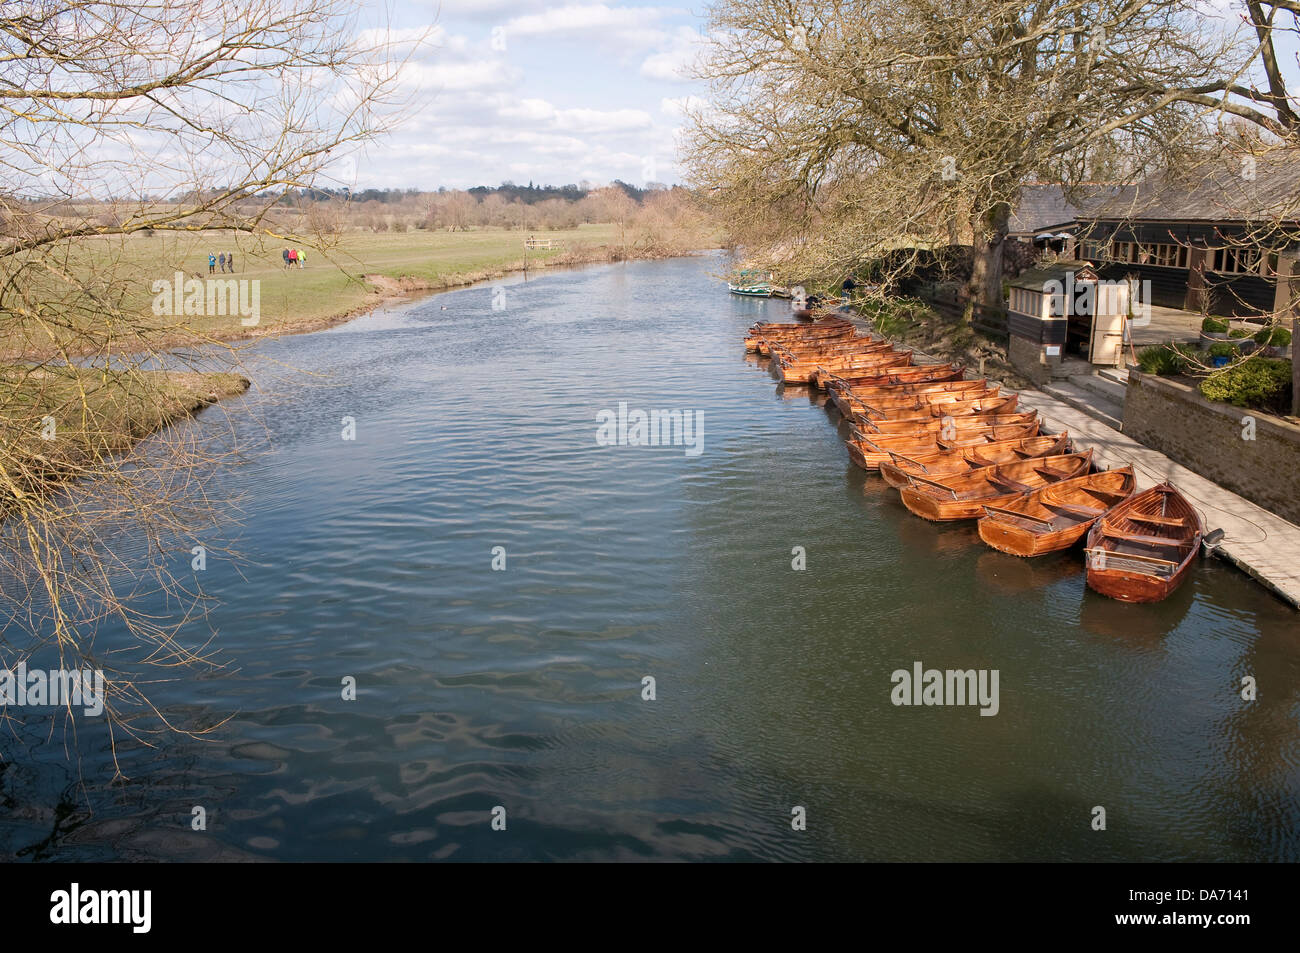 Boats on the river Stour, Dedham Vale, UK Stock Photo